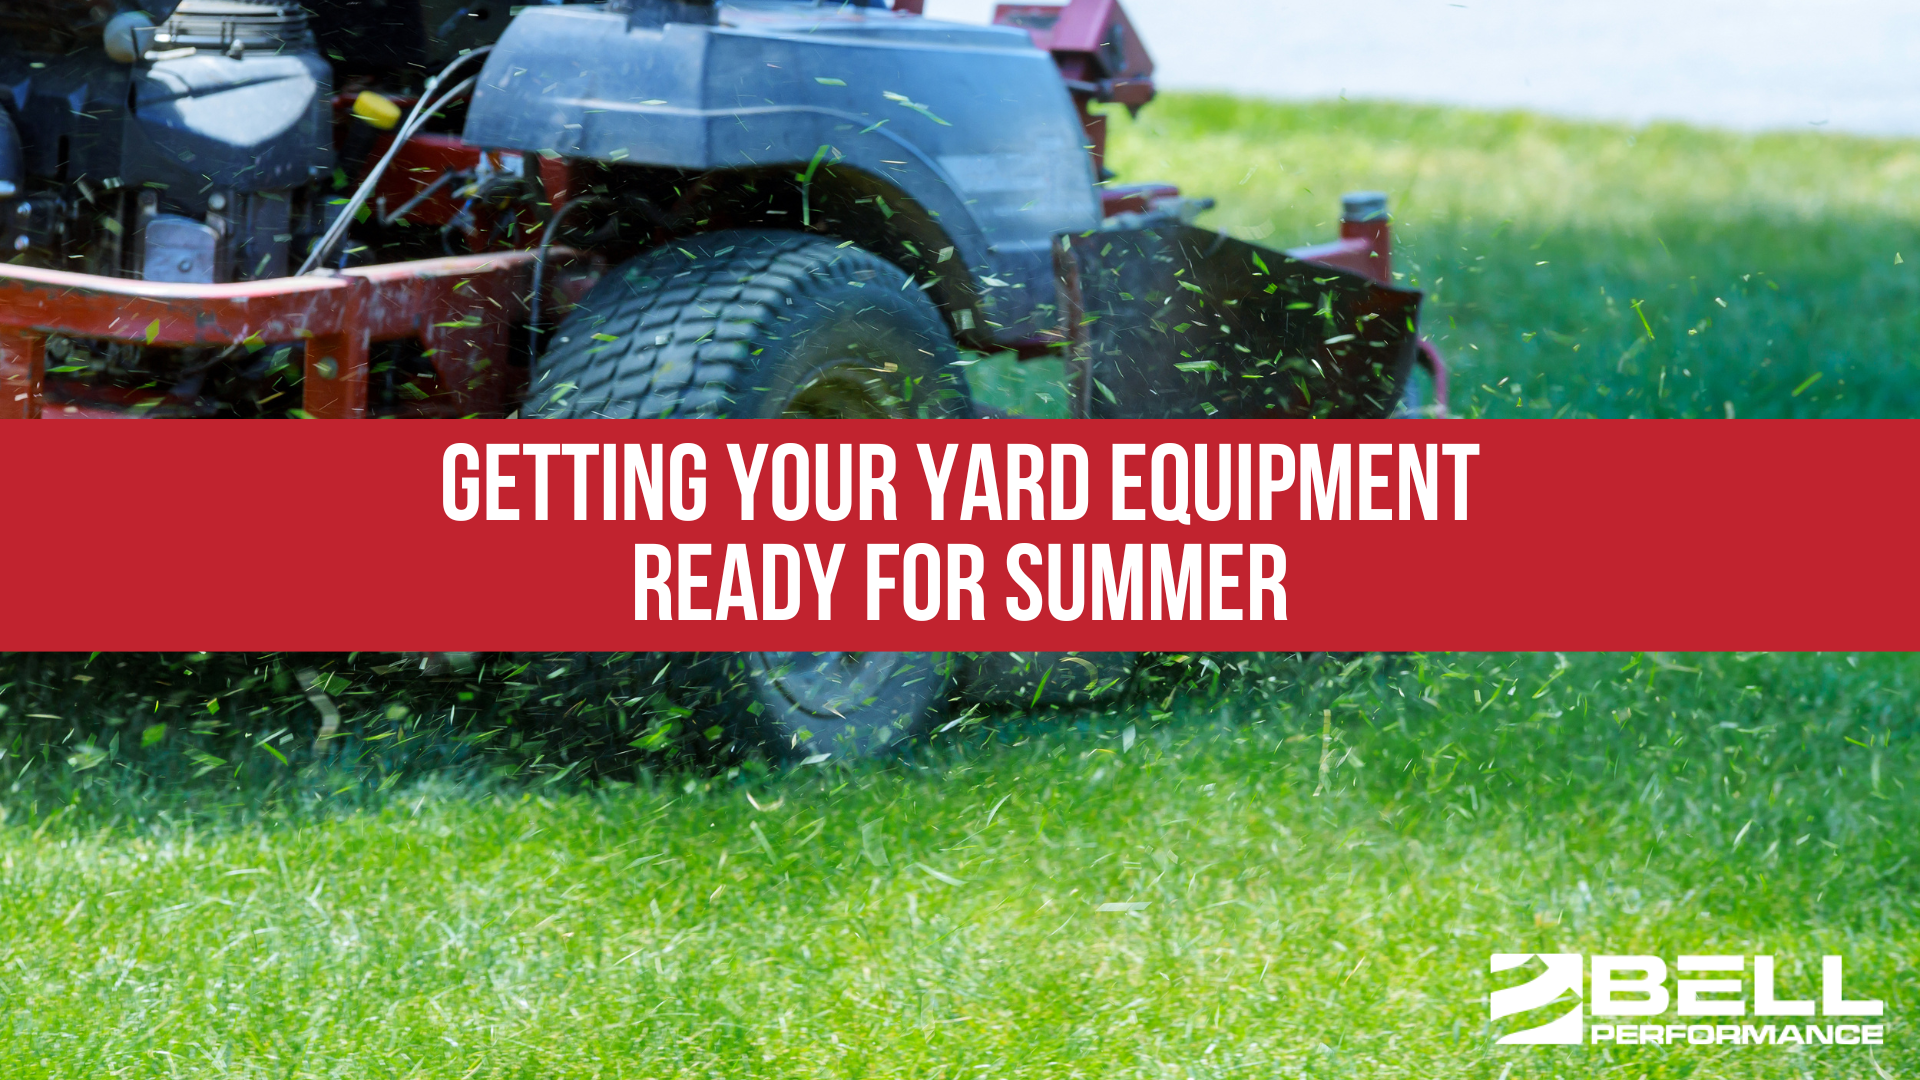 Getting Your Yard Equipment Ready for Summer